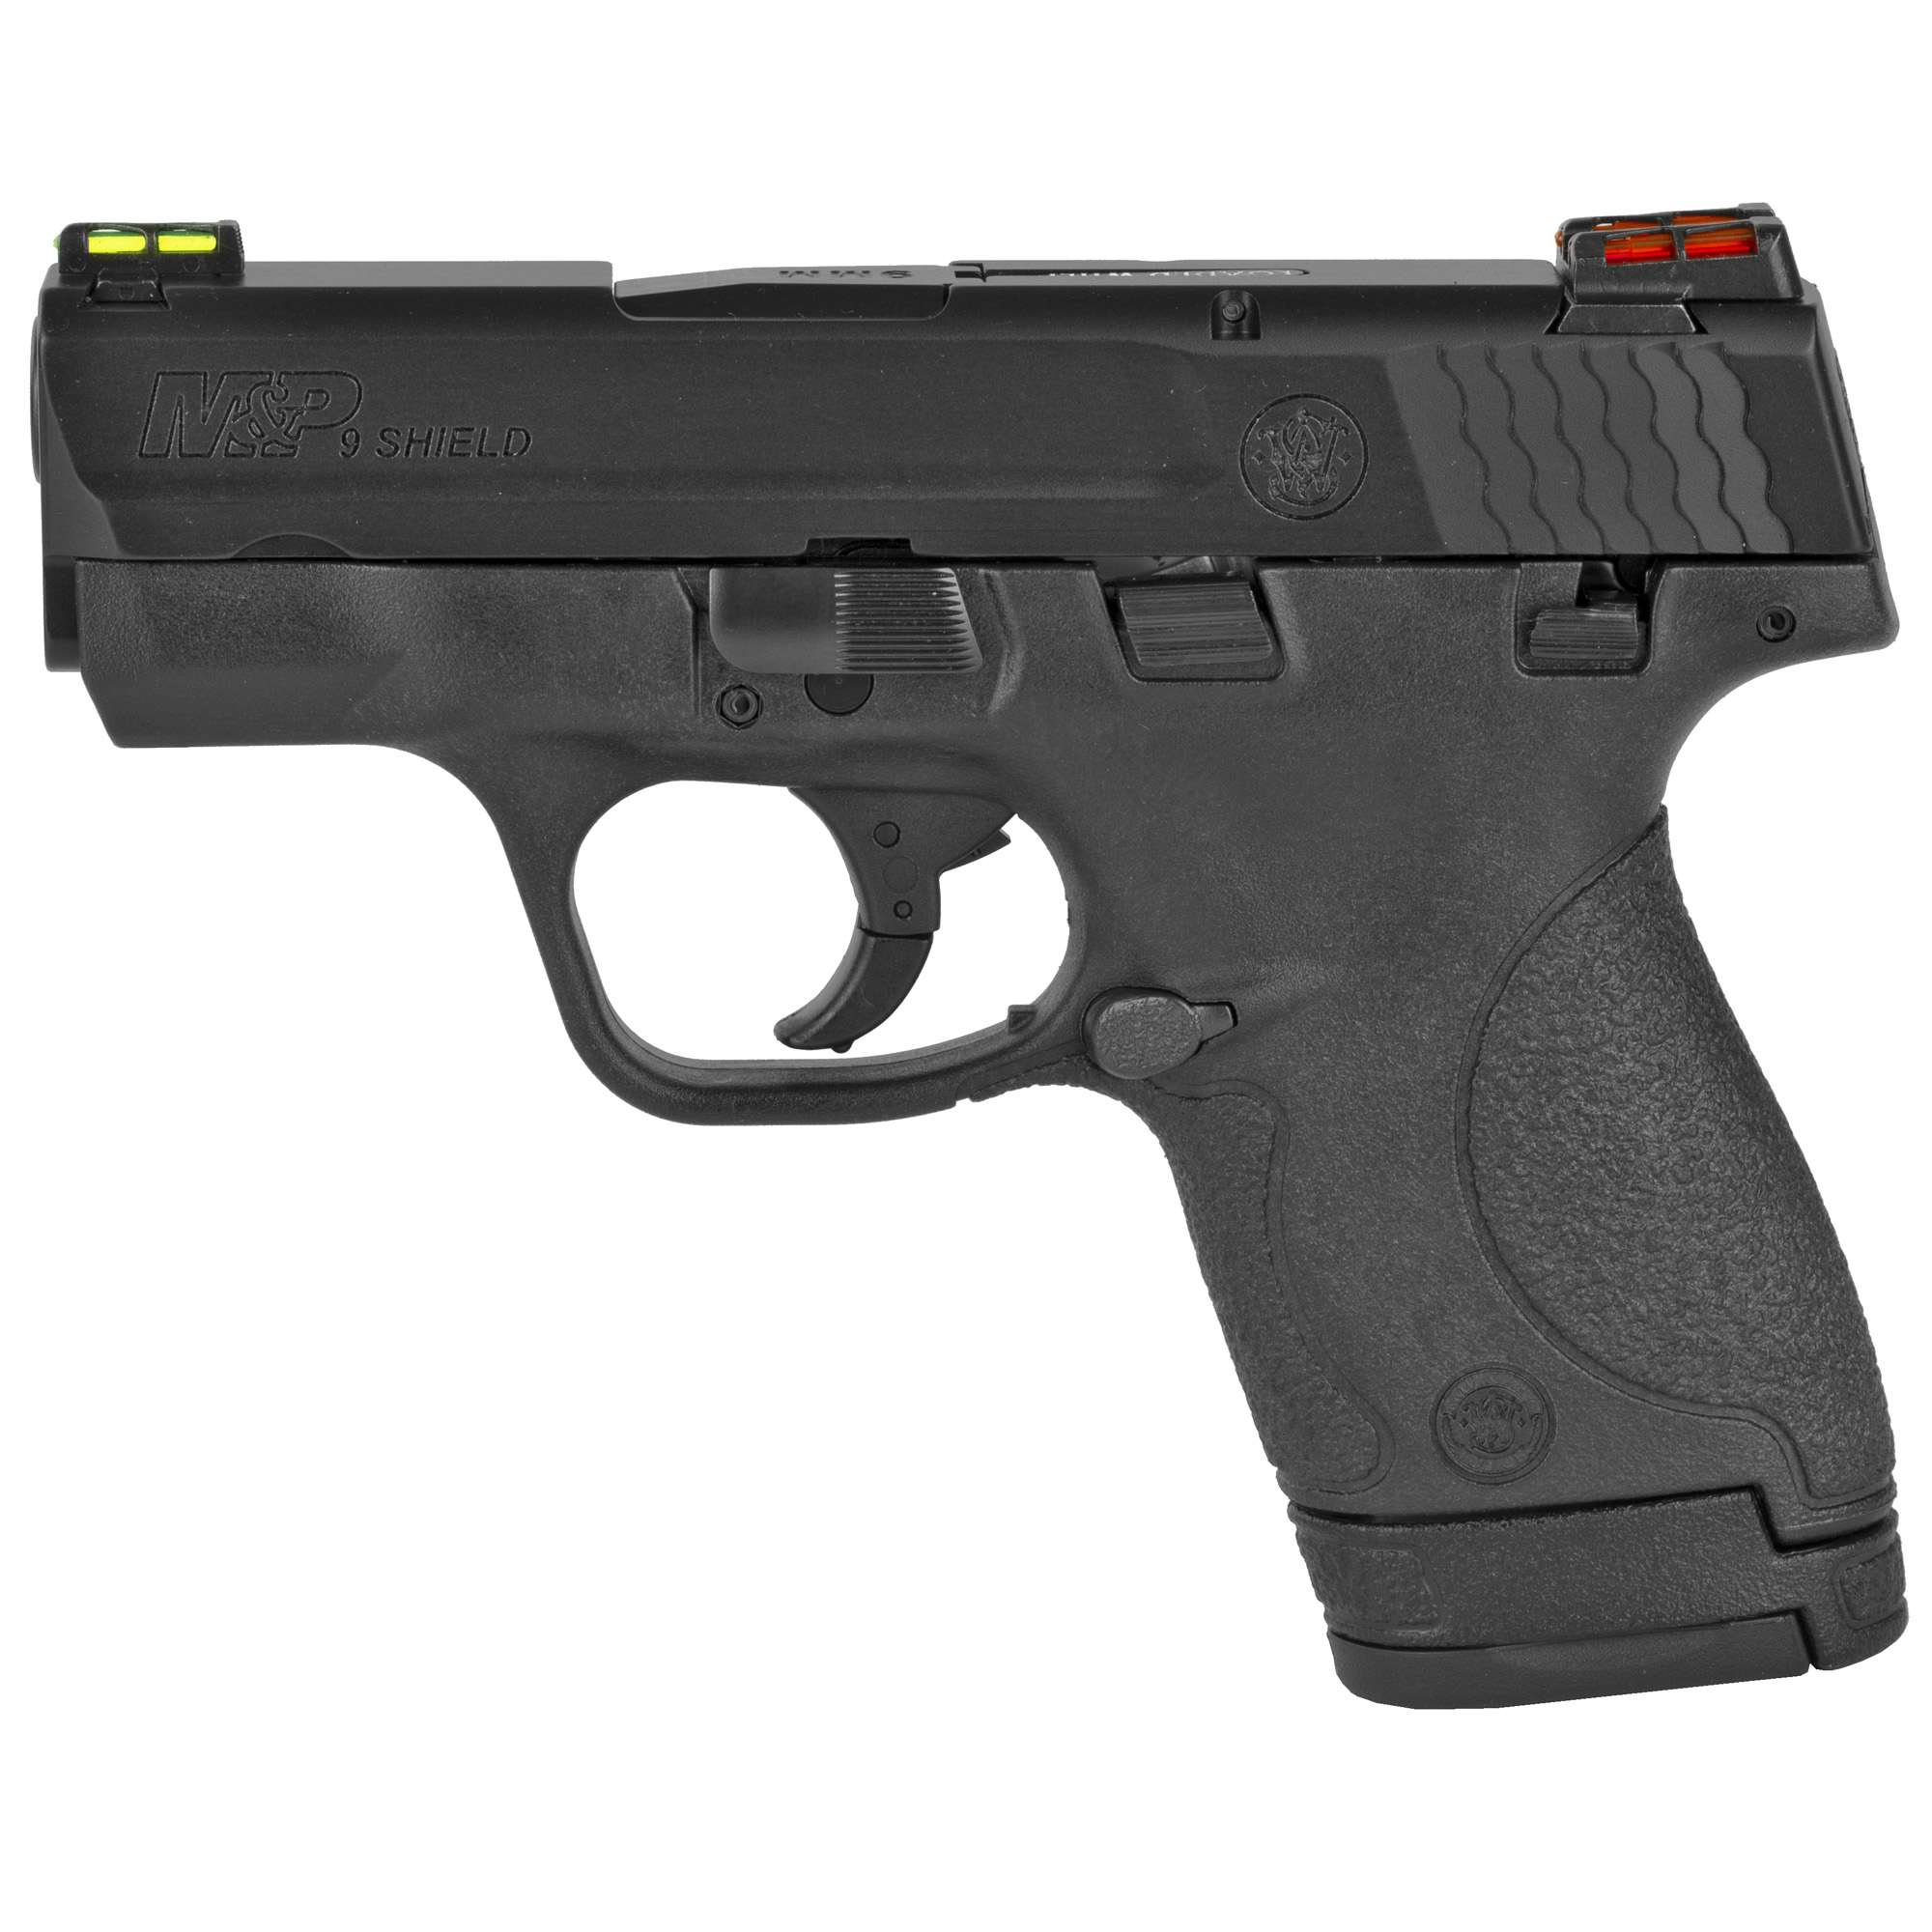 Smith & Wesson, M&P Shield, Striker Fired, Semi-automatic, Polymer Frame Pistol, Micro-Compact, 9MM, 3.1" Barrel, Armornite Finish, Black, HiViz Fiber Optic Sights, Manual Thumb Safety, 2 Magazines, (1) 7-Round and (1) 8-Round